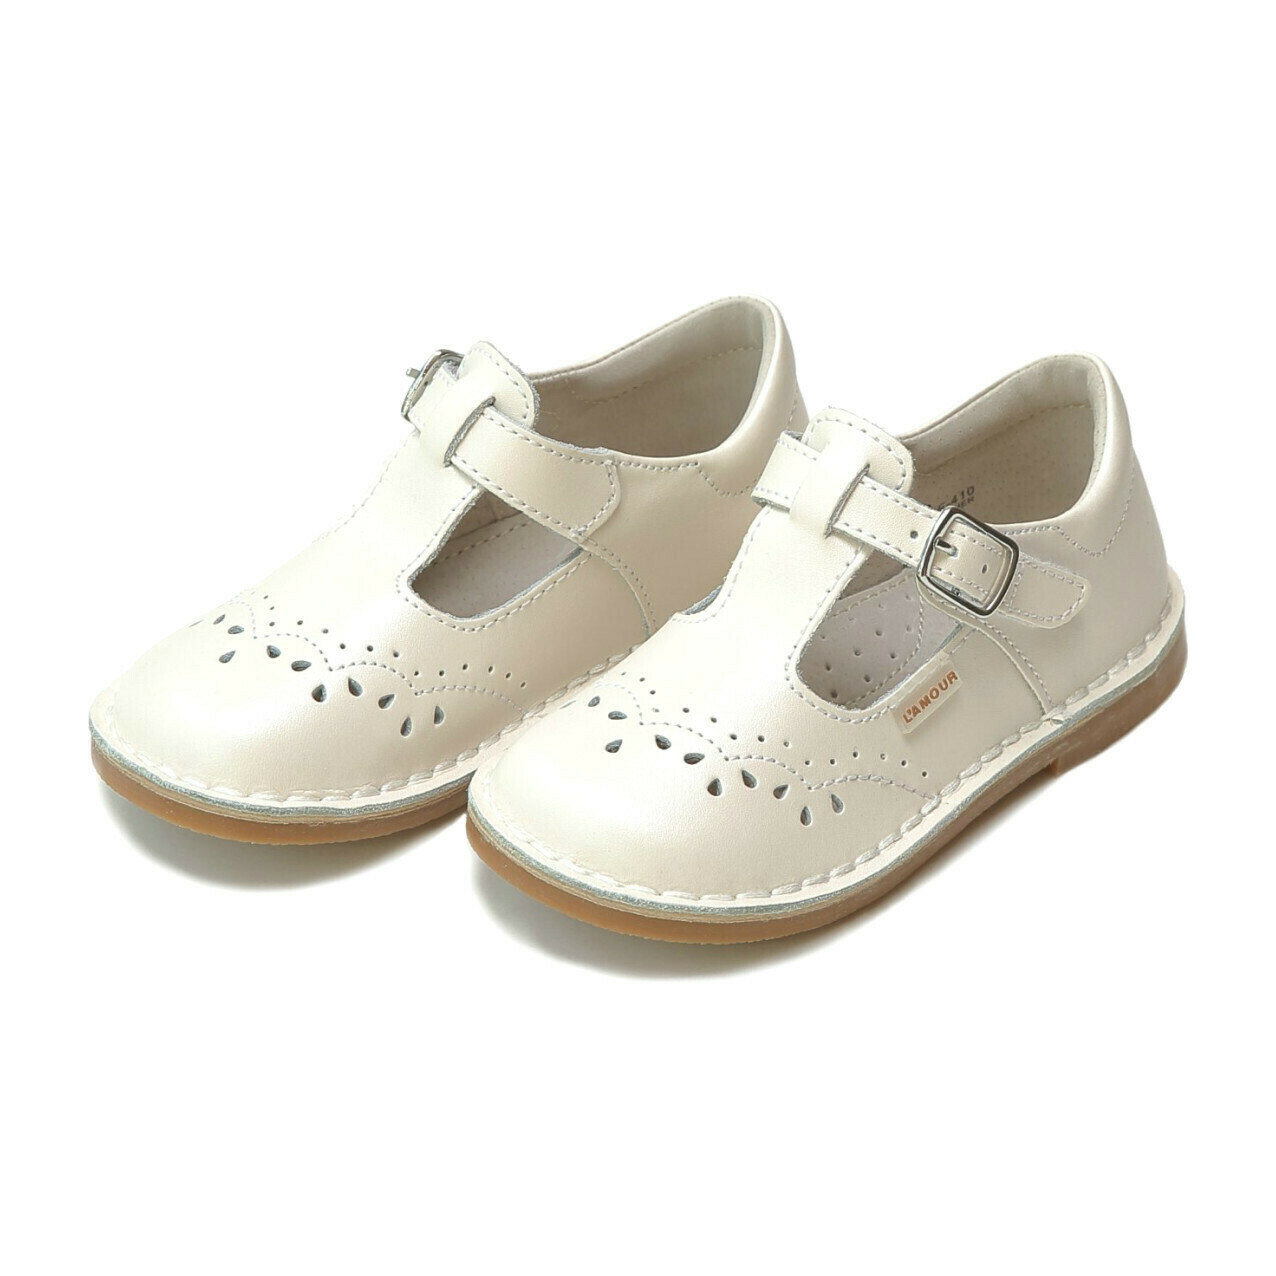 L'Amour Ruthie Stitched Mary Janes - Pearl White